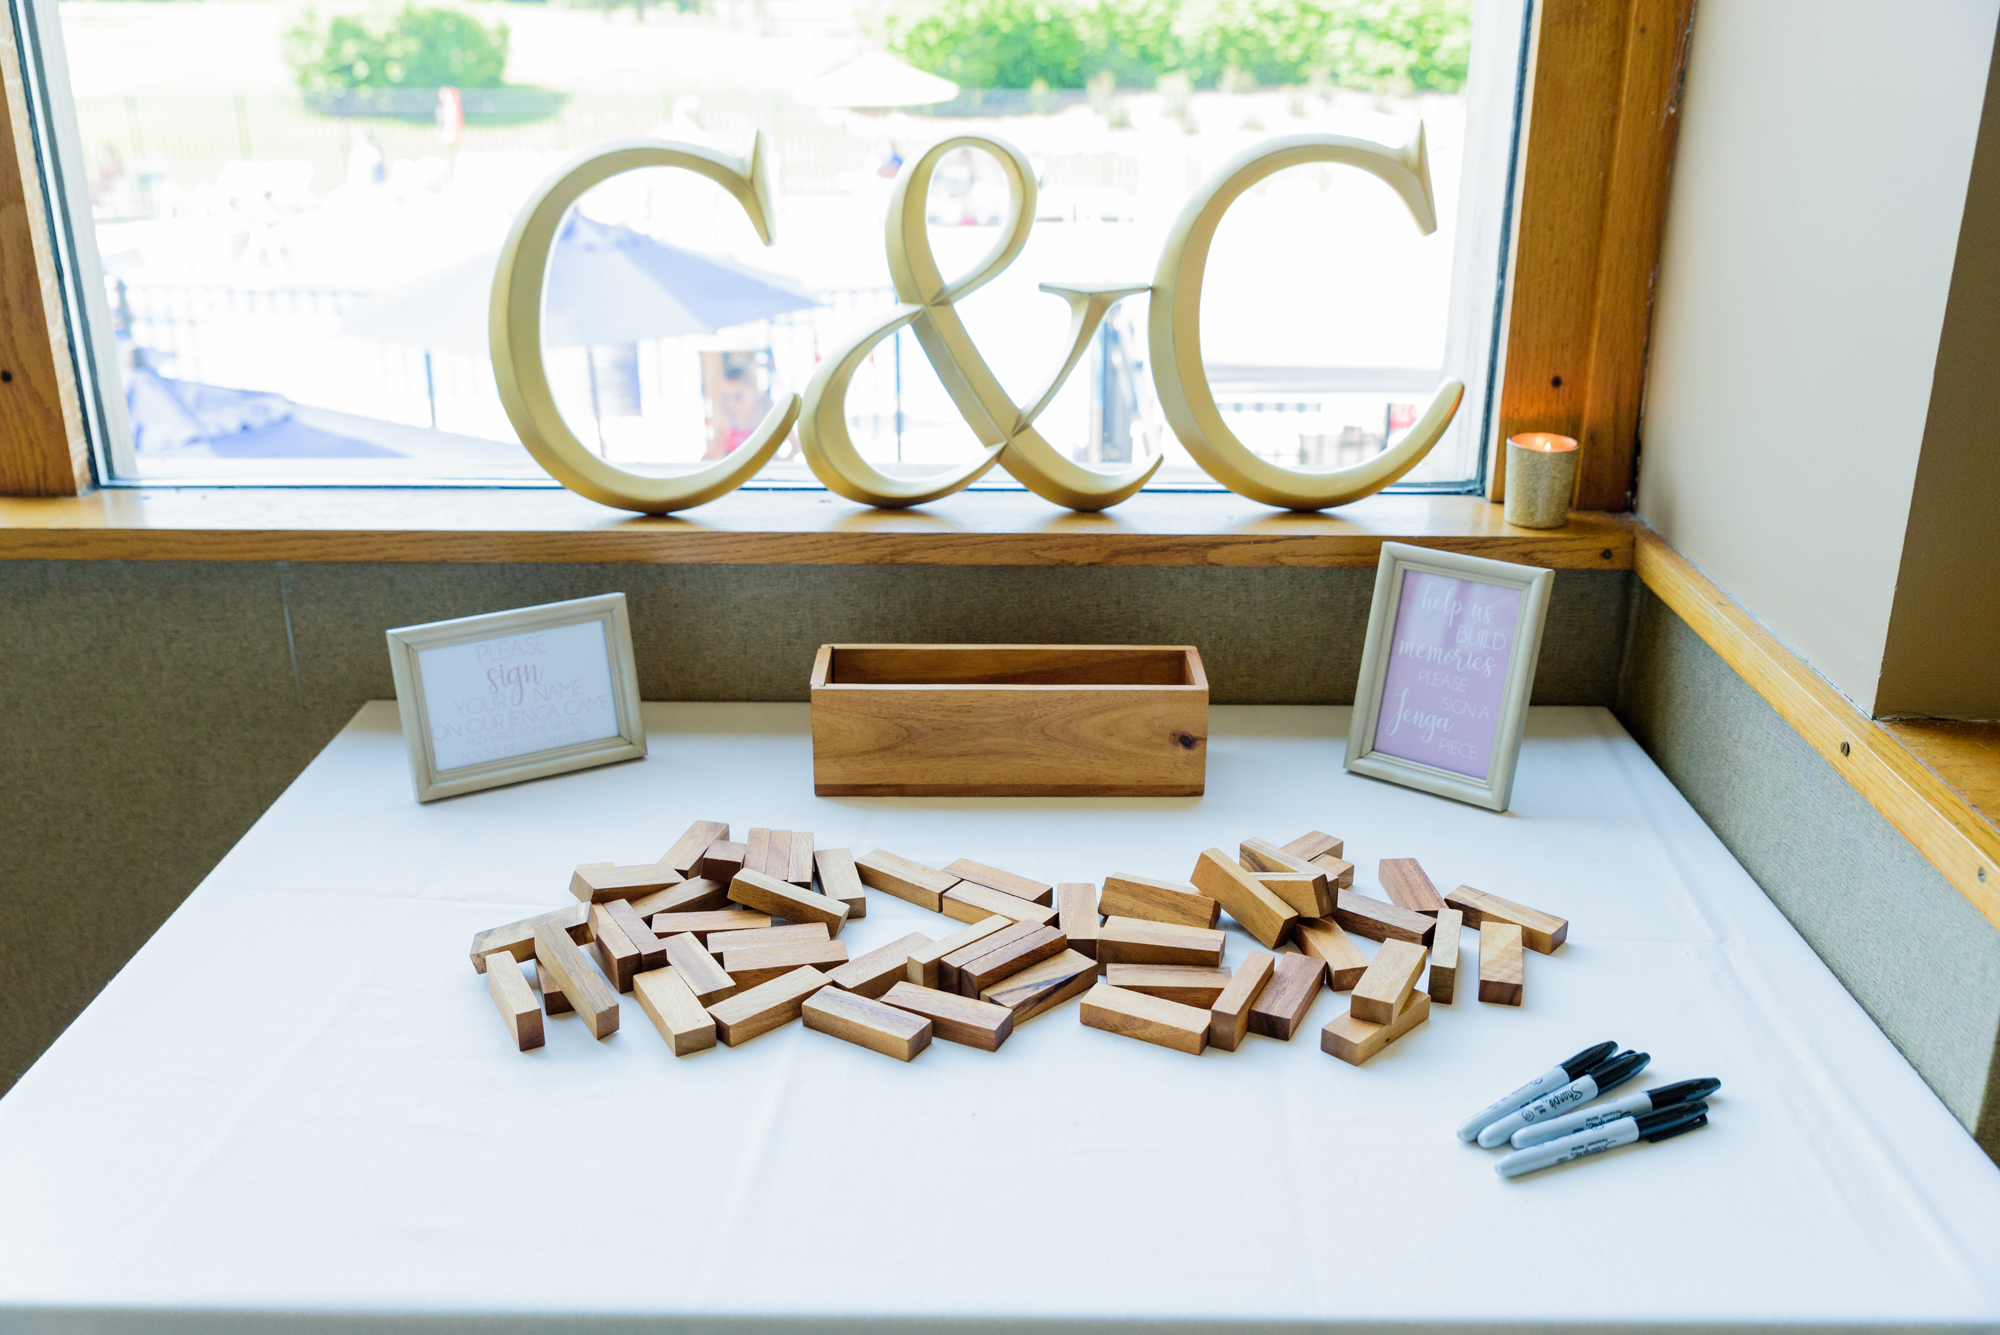 wedding details for a wedding reception at Morris Park Country Club